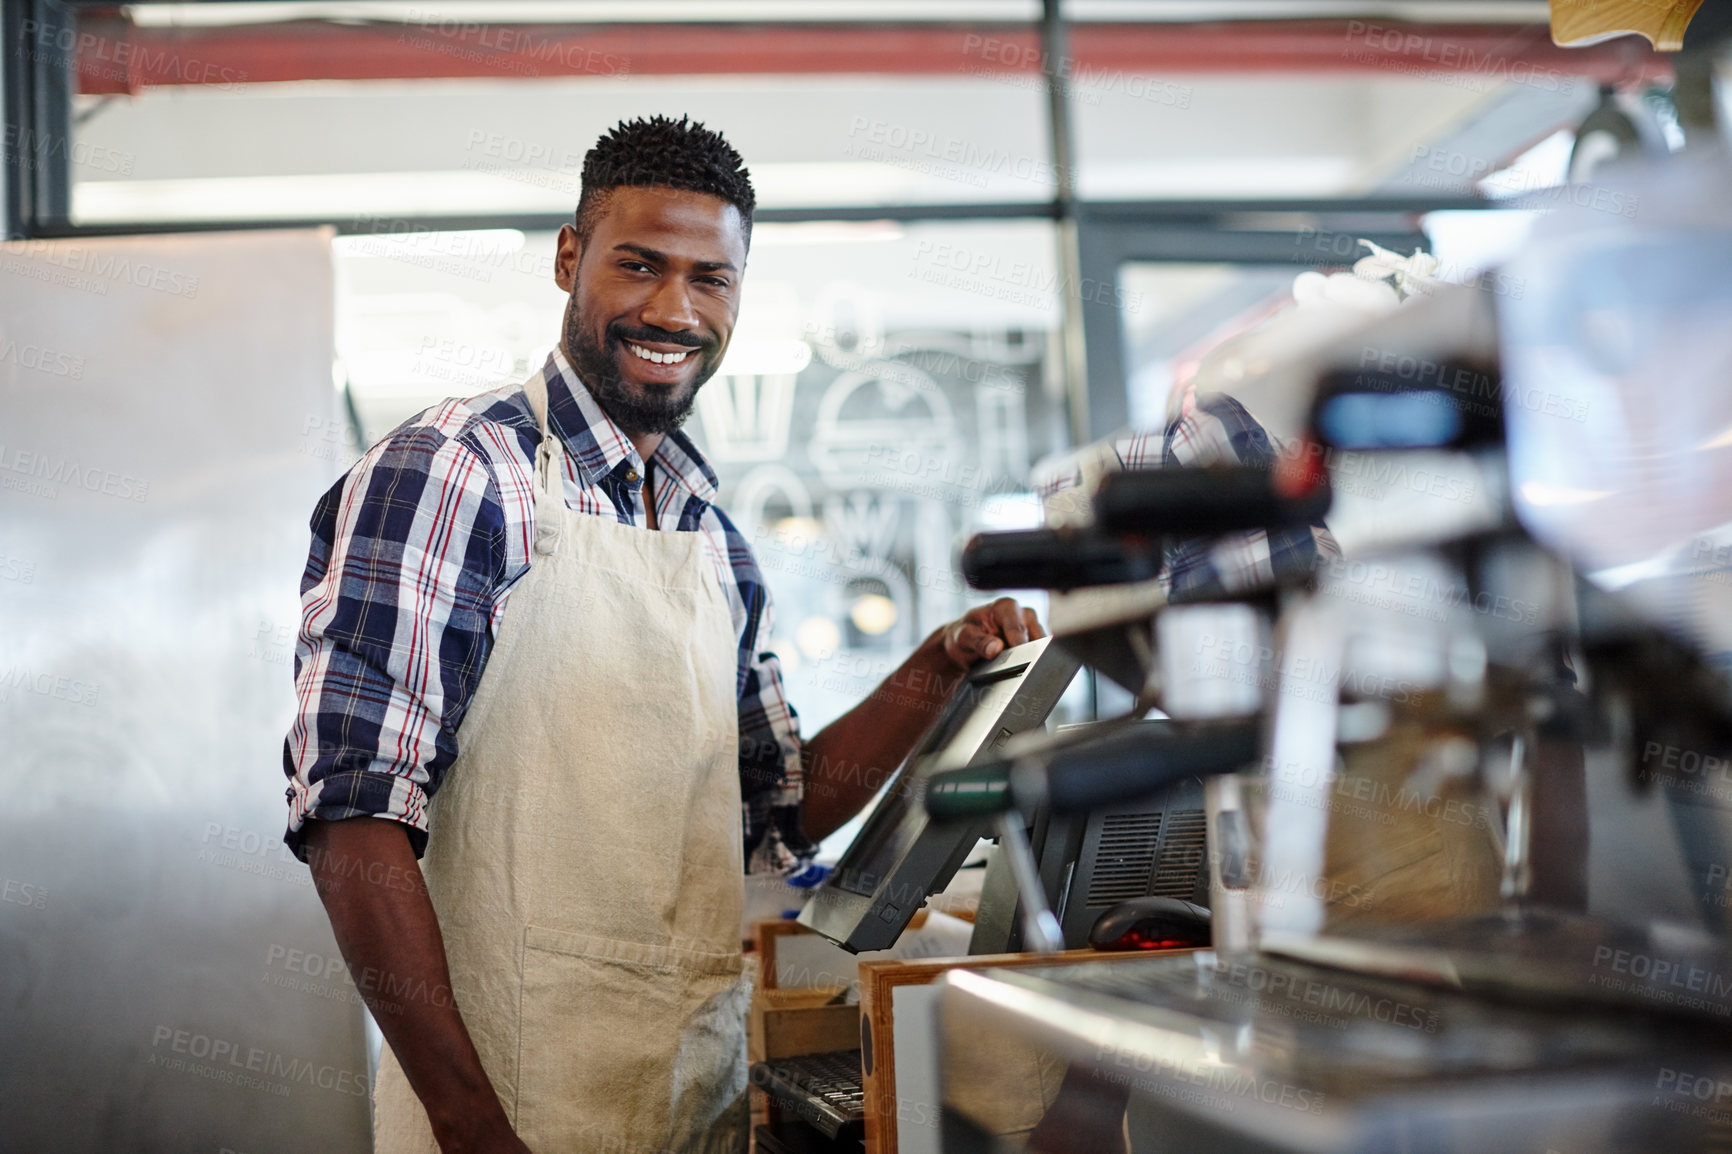 Buy stock photo Cropped portrait of a handsome male barista working in a coffee shop